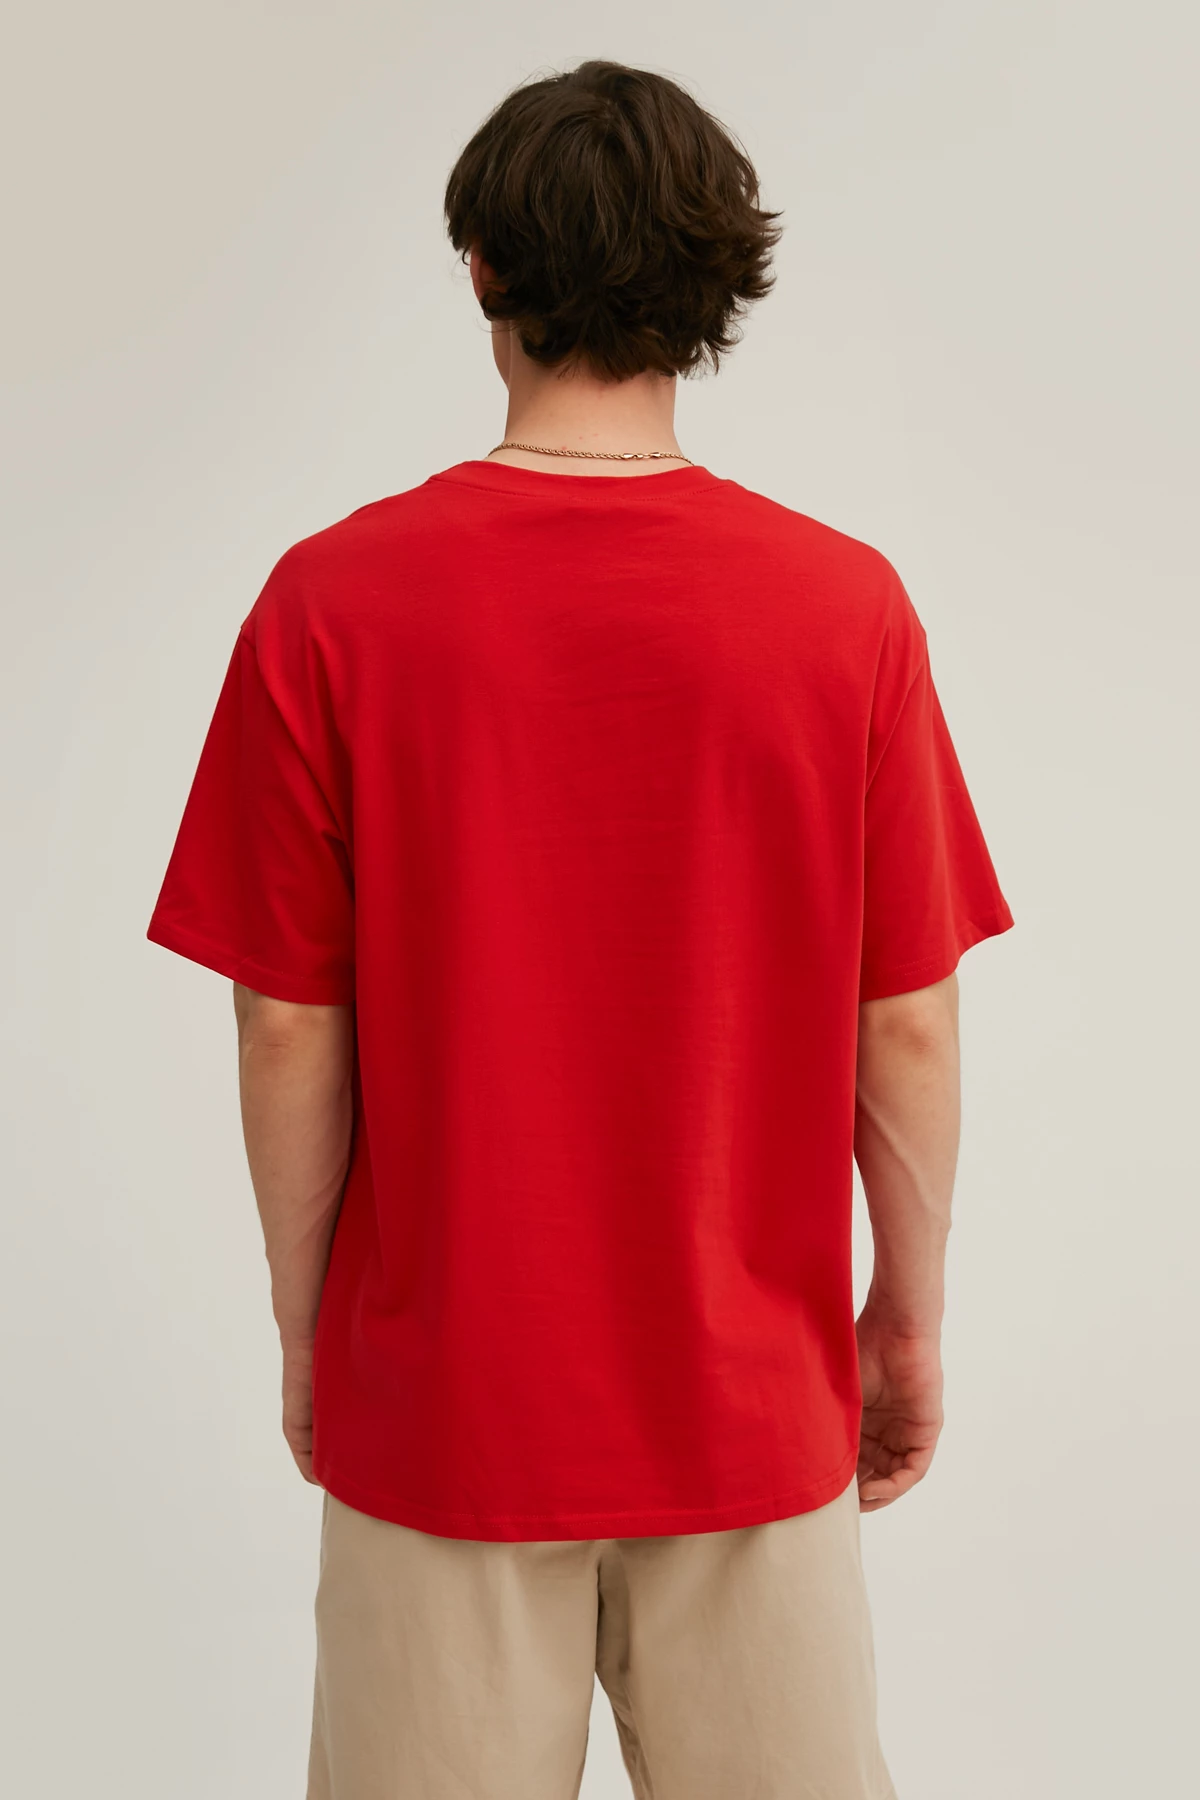 Red jersey unisex T-shirt "Emotional support", photo 9